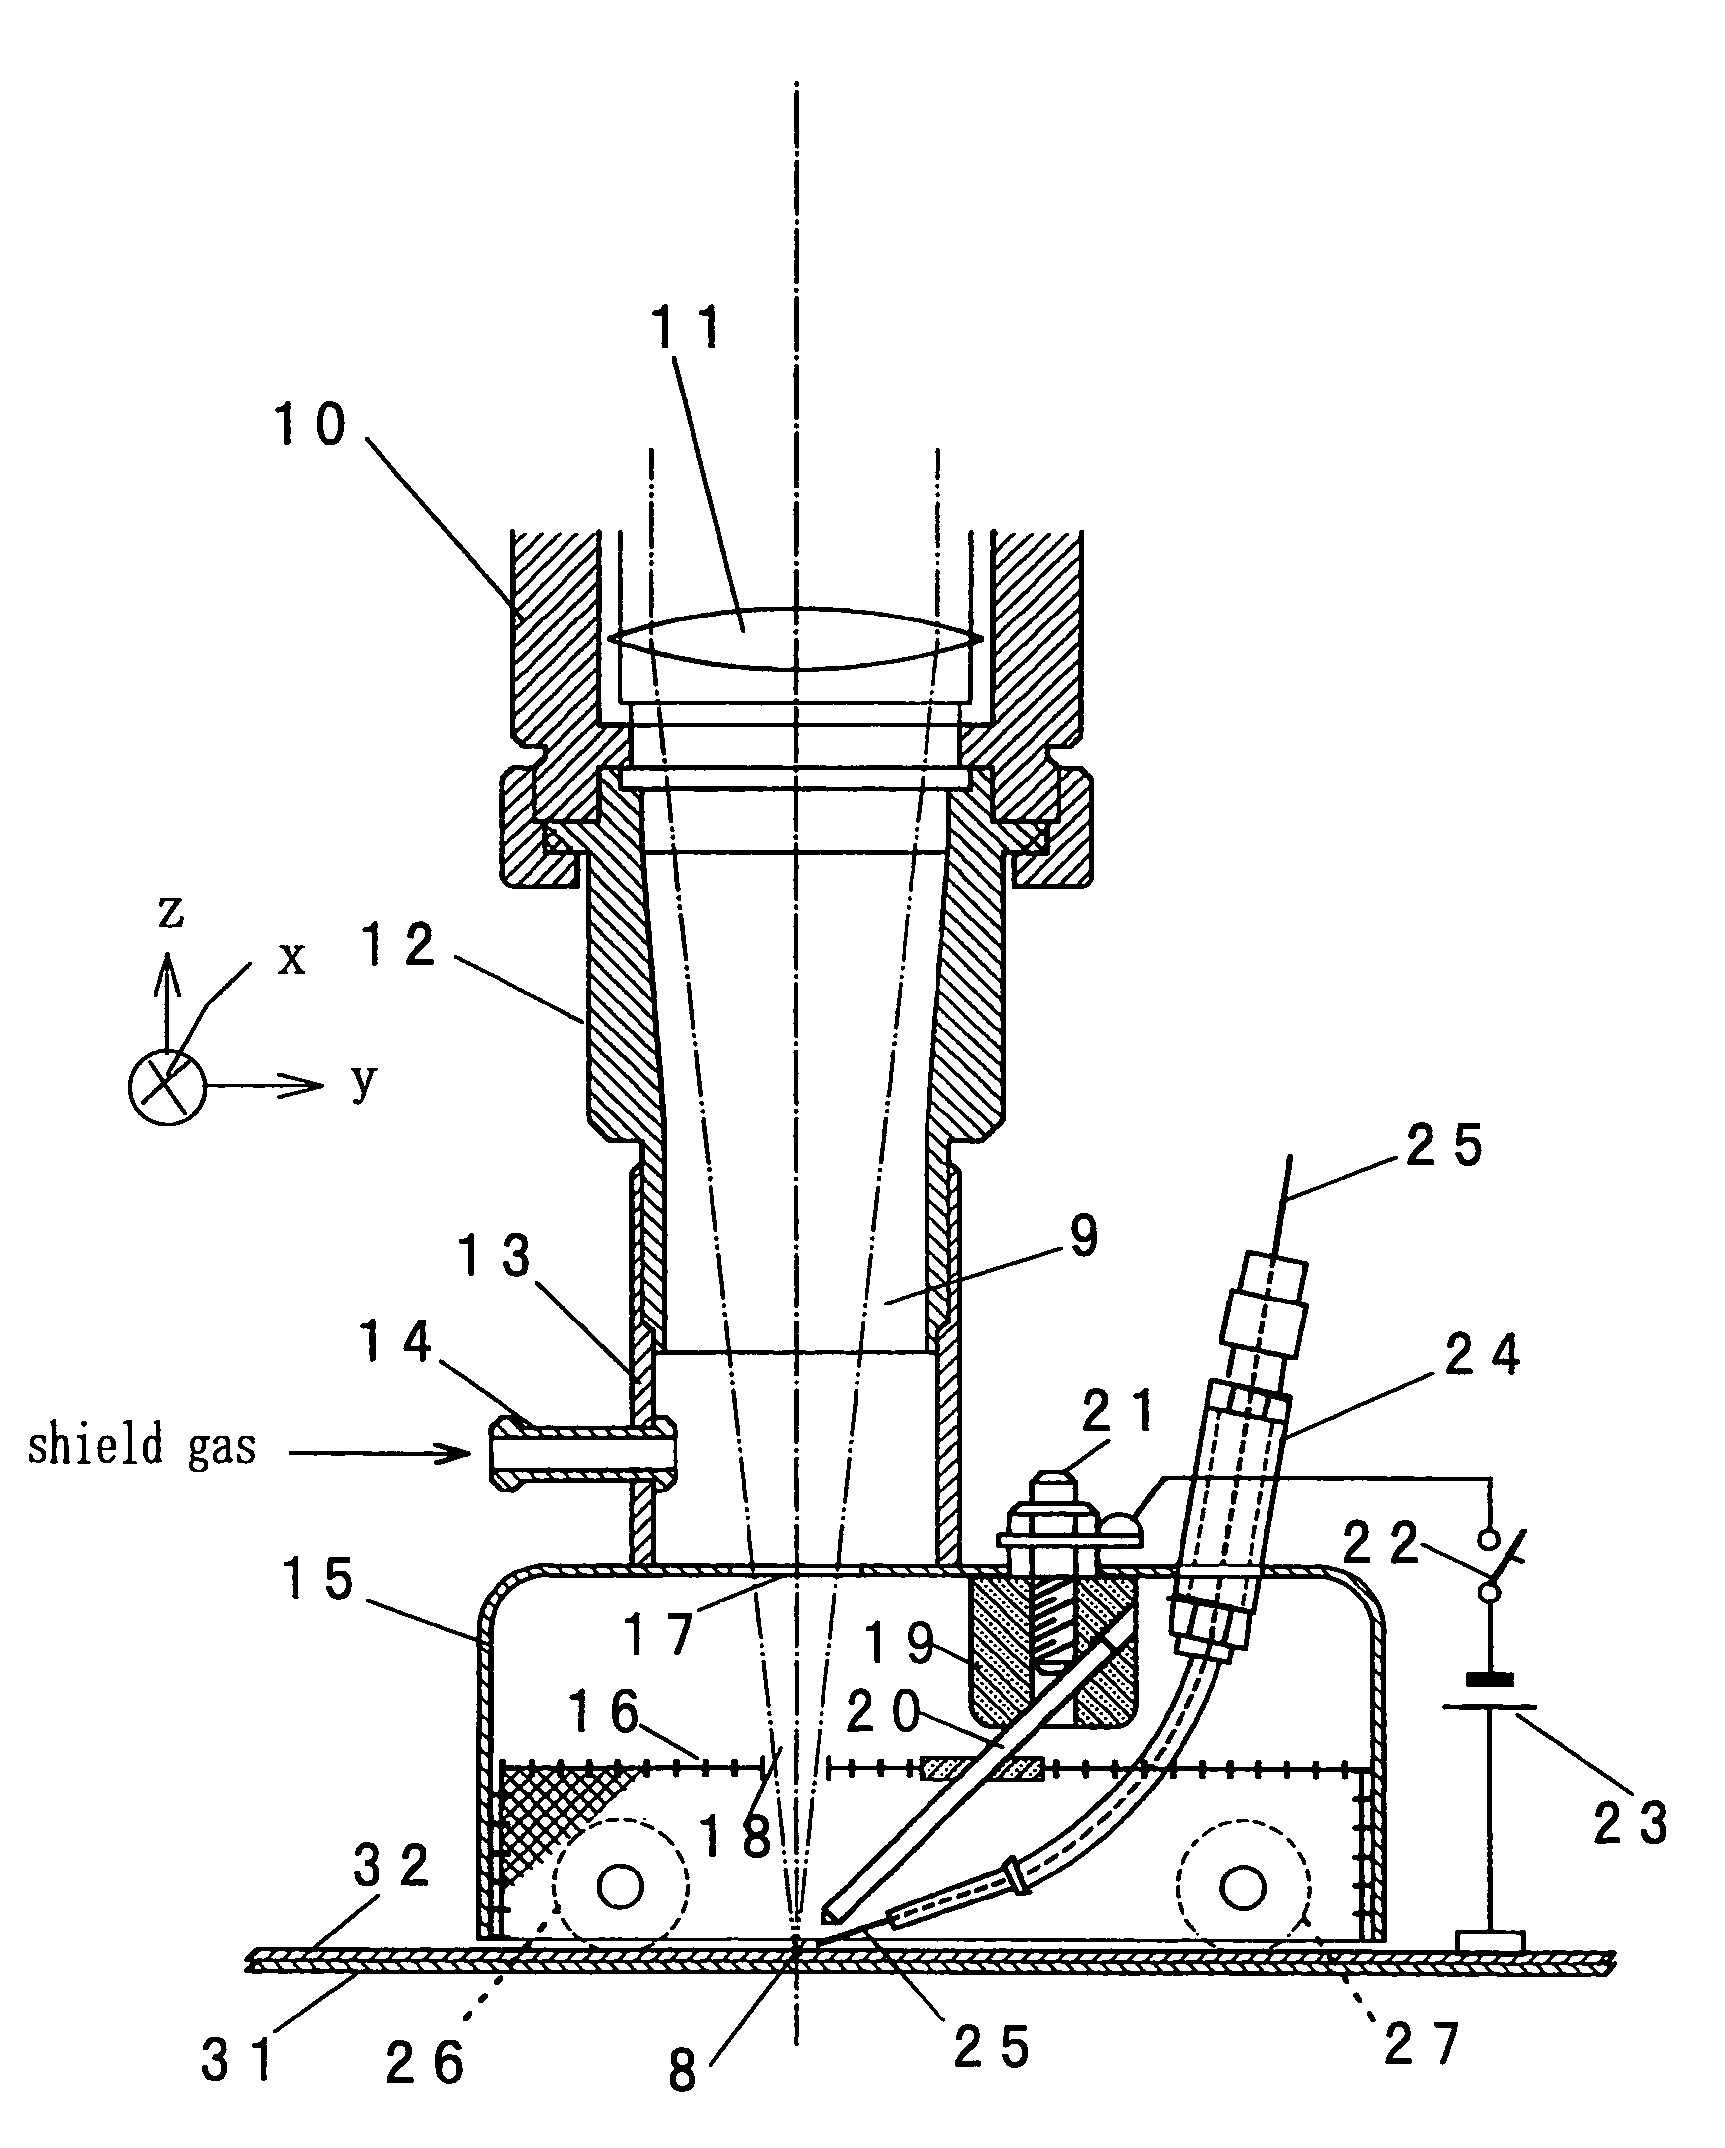 Method and apparatus for composite YAG laser/arc welding